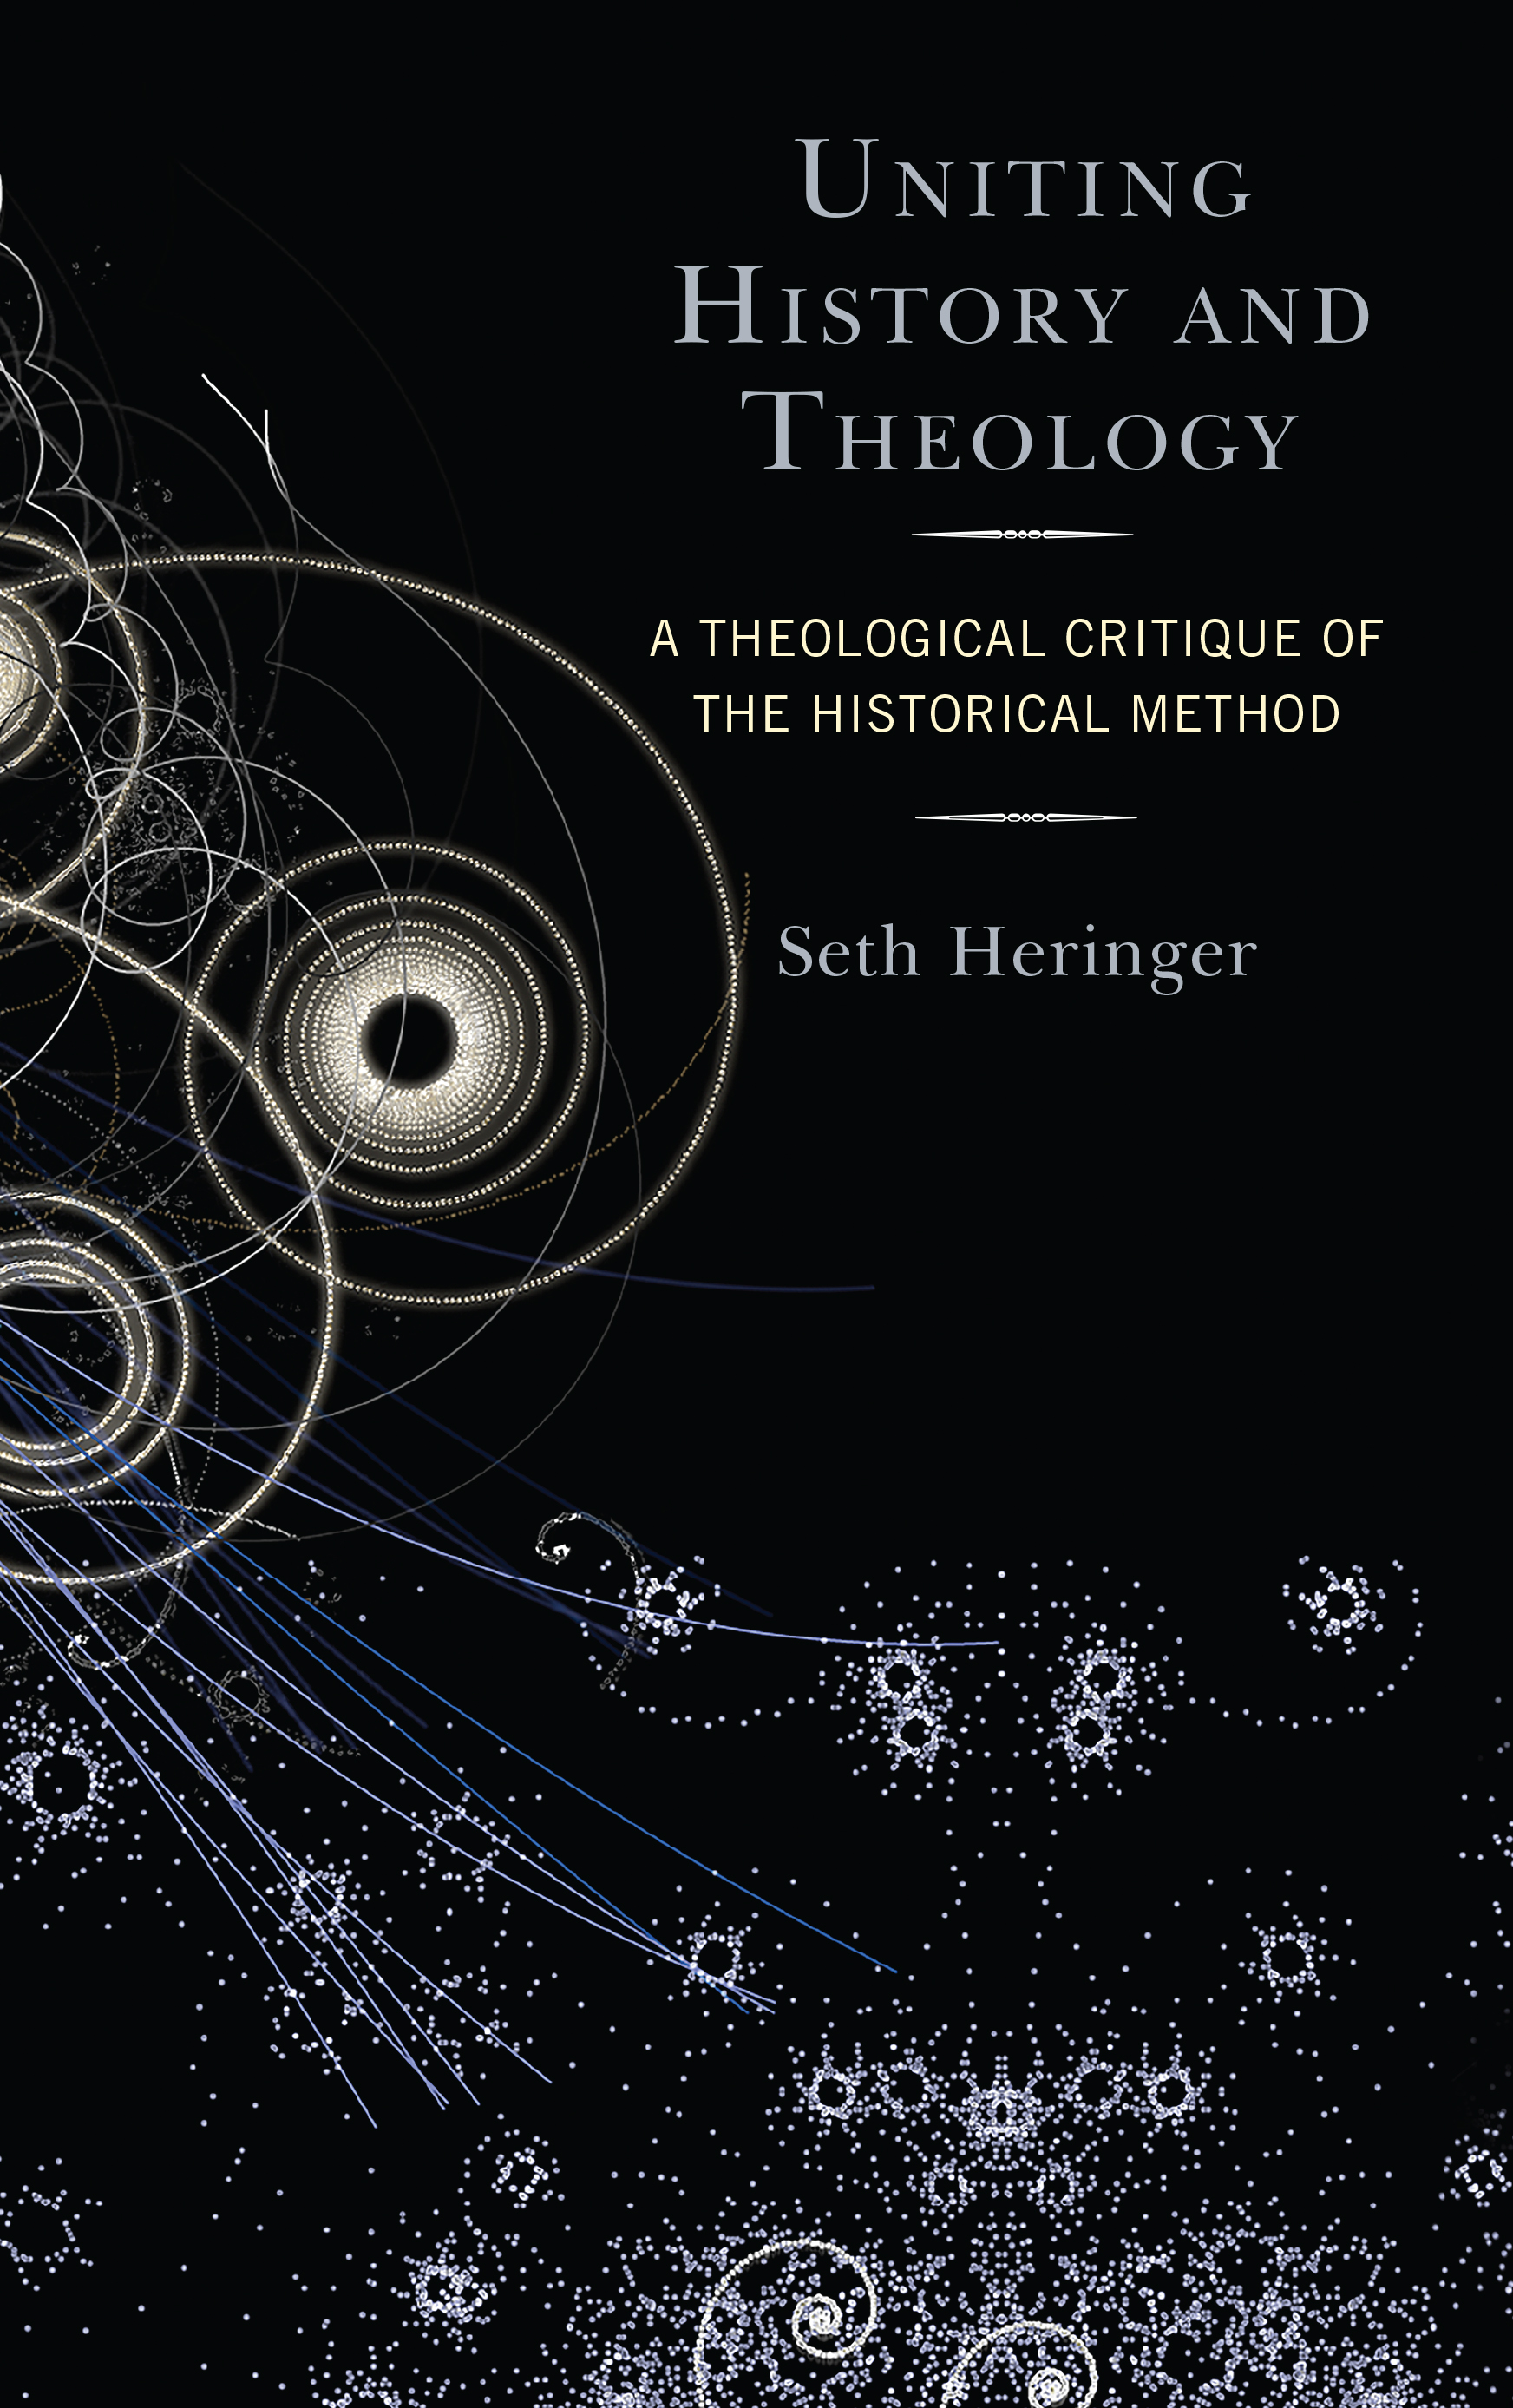 Uniting History and Theology: A Theological Critique of the Historical Method